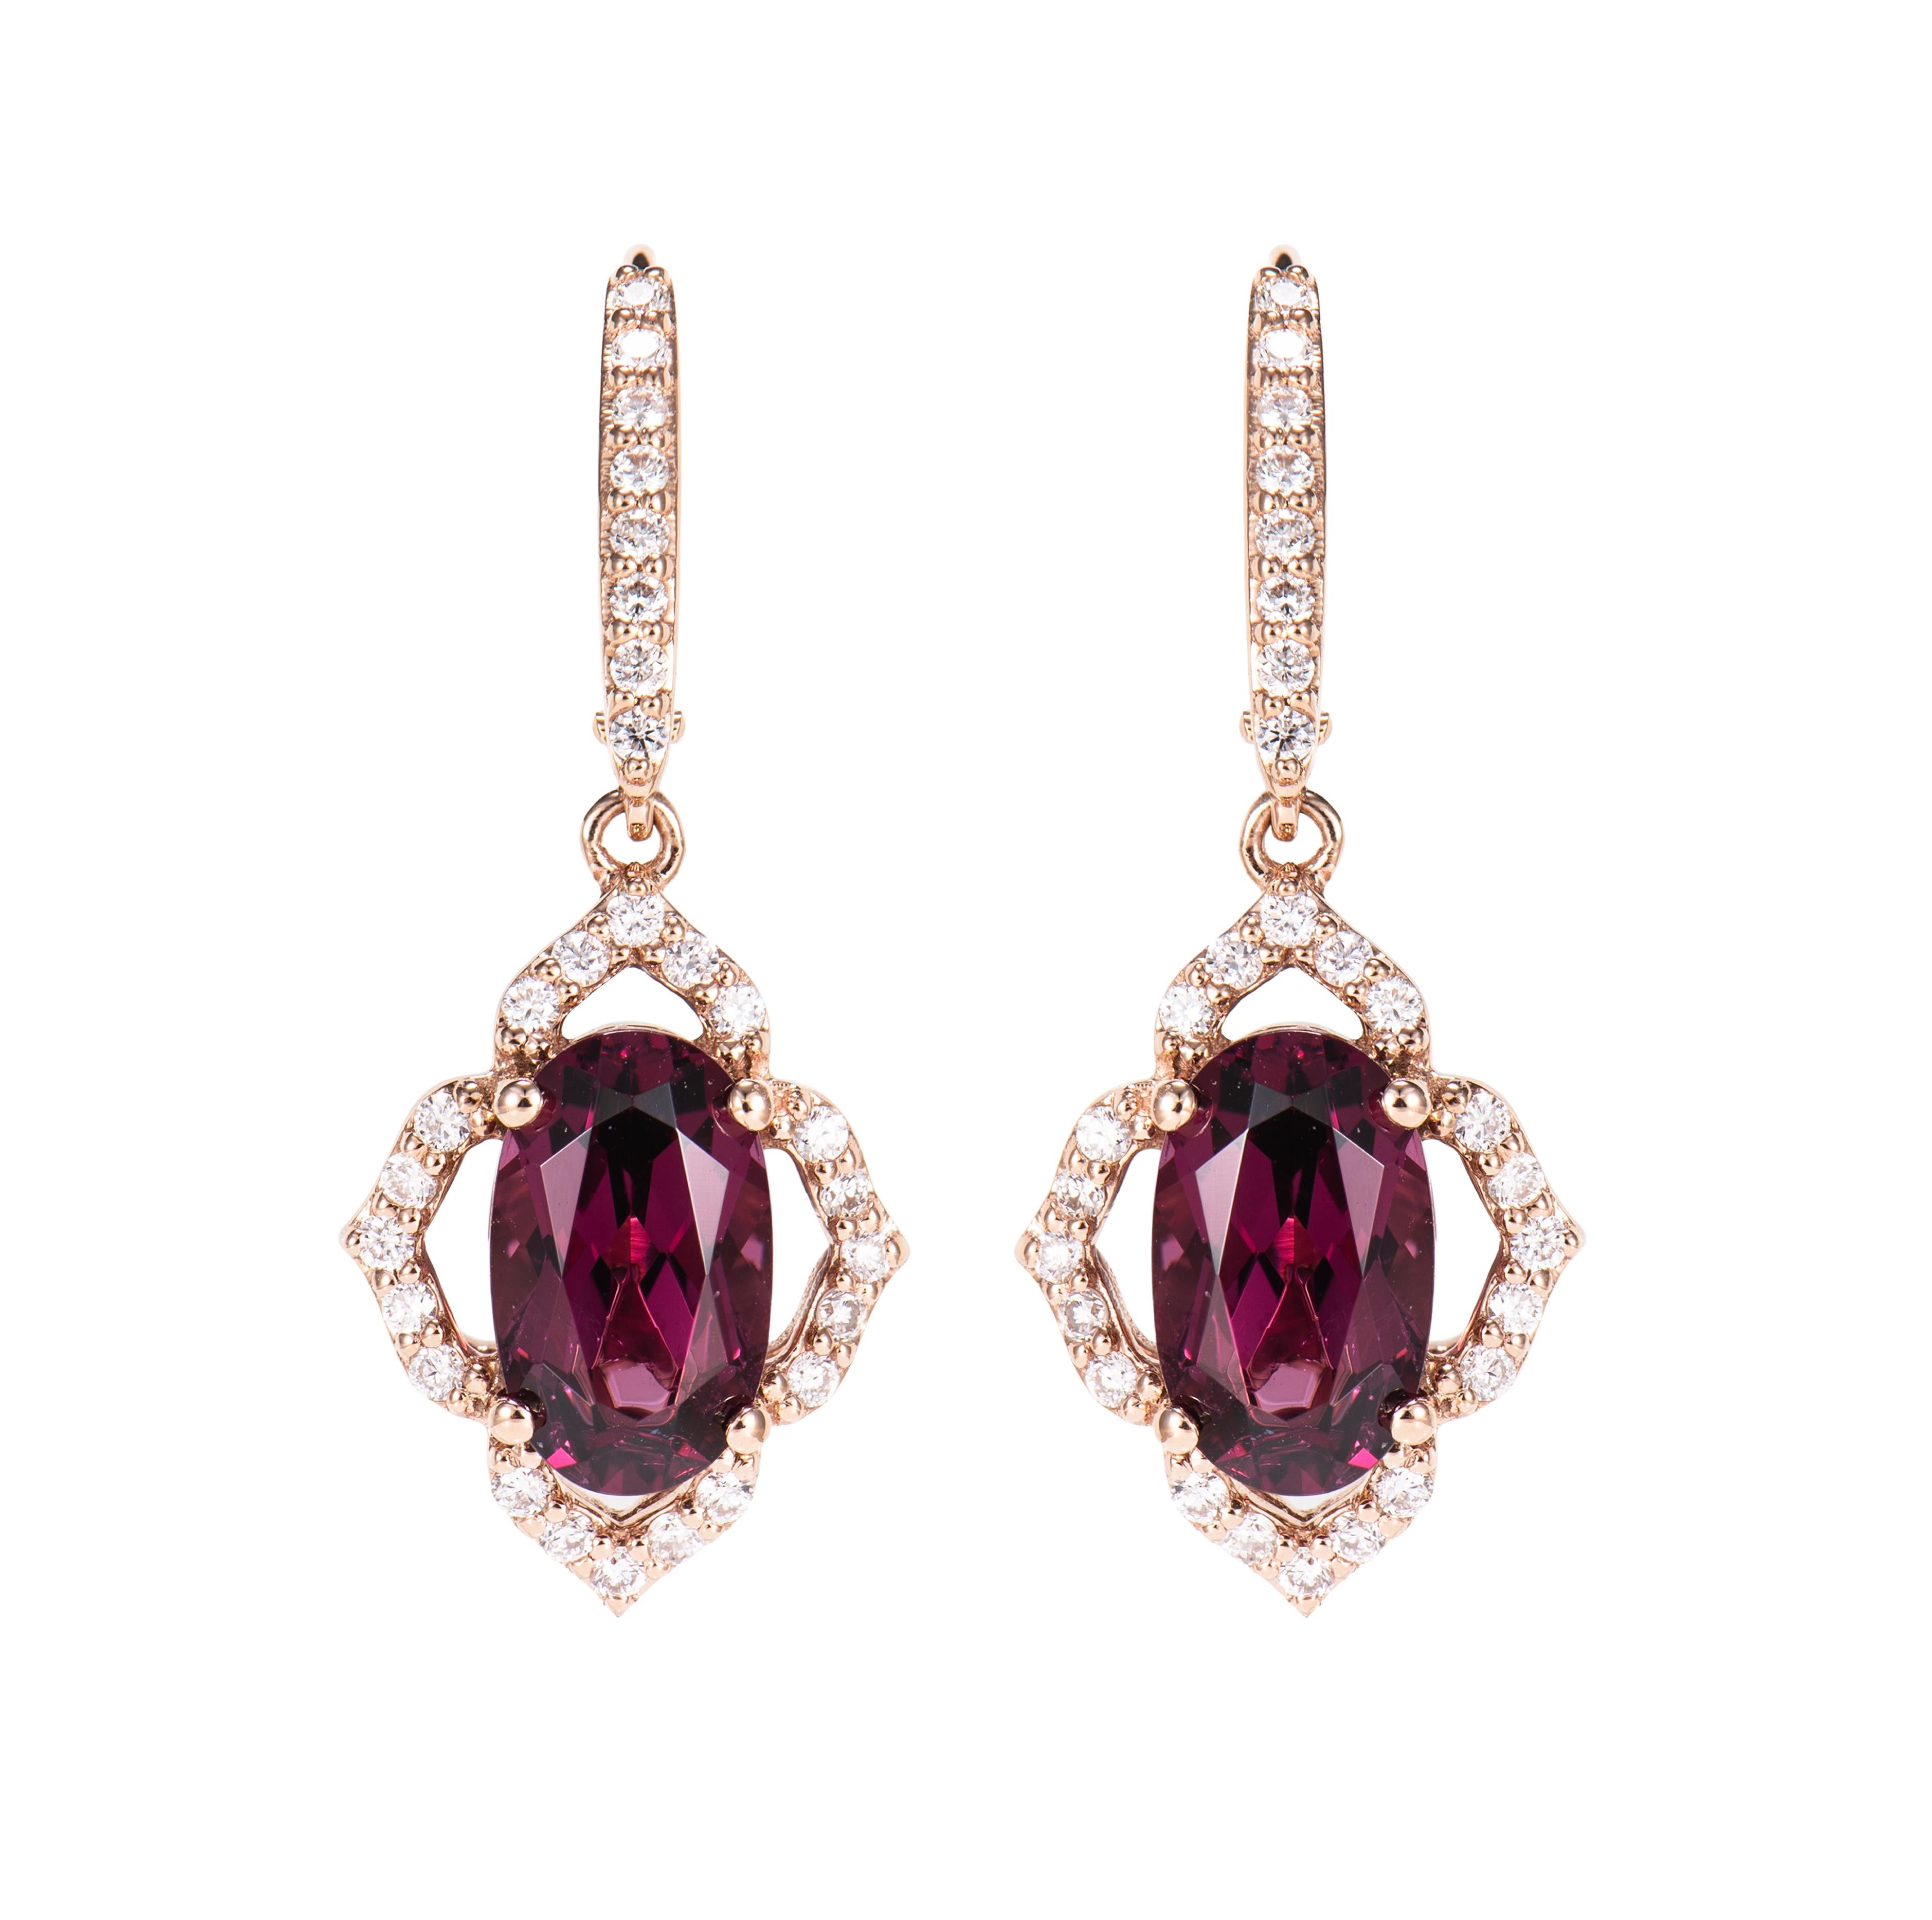 Contemporary 4.95 Carat Rhodolite Drop Earring in 18Karat Rose Gold with White Diamond For Sale